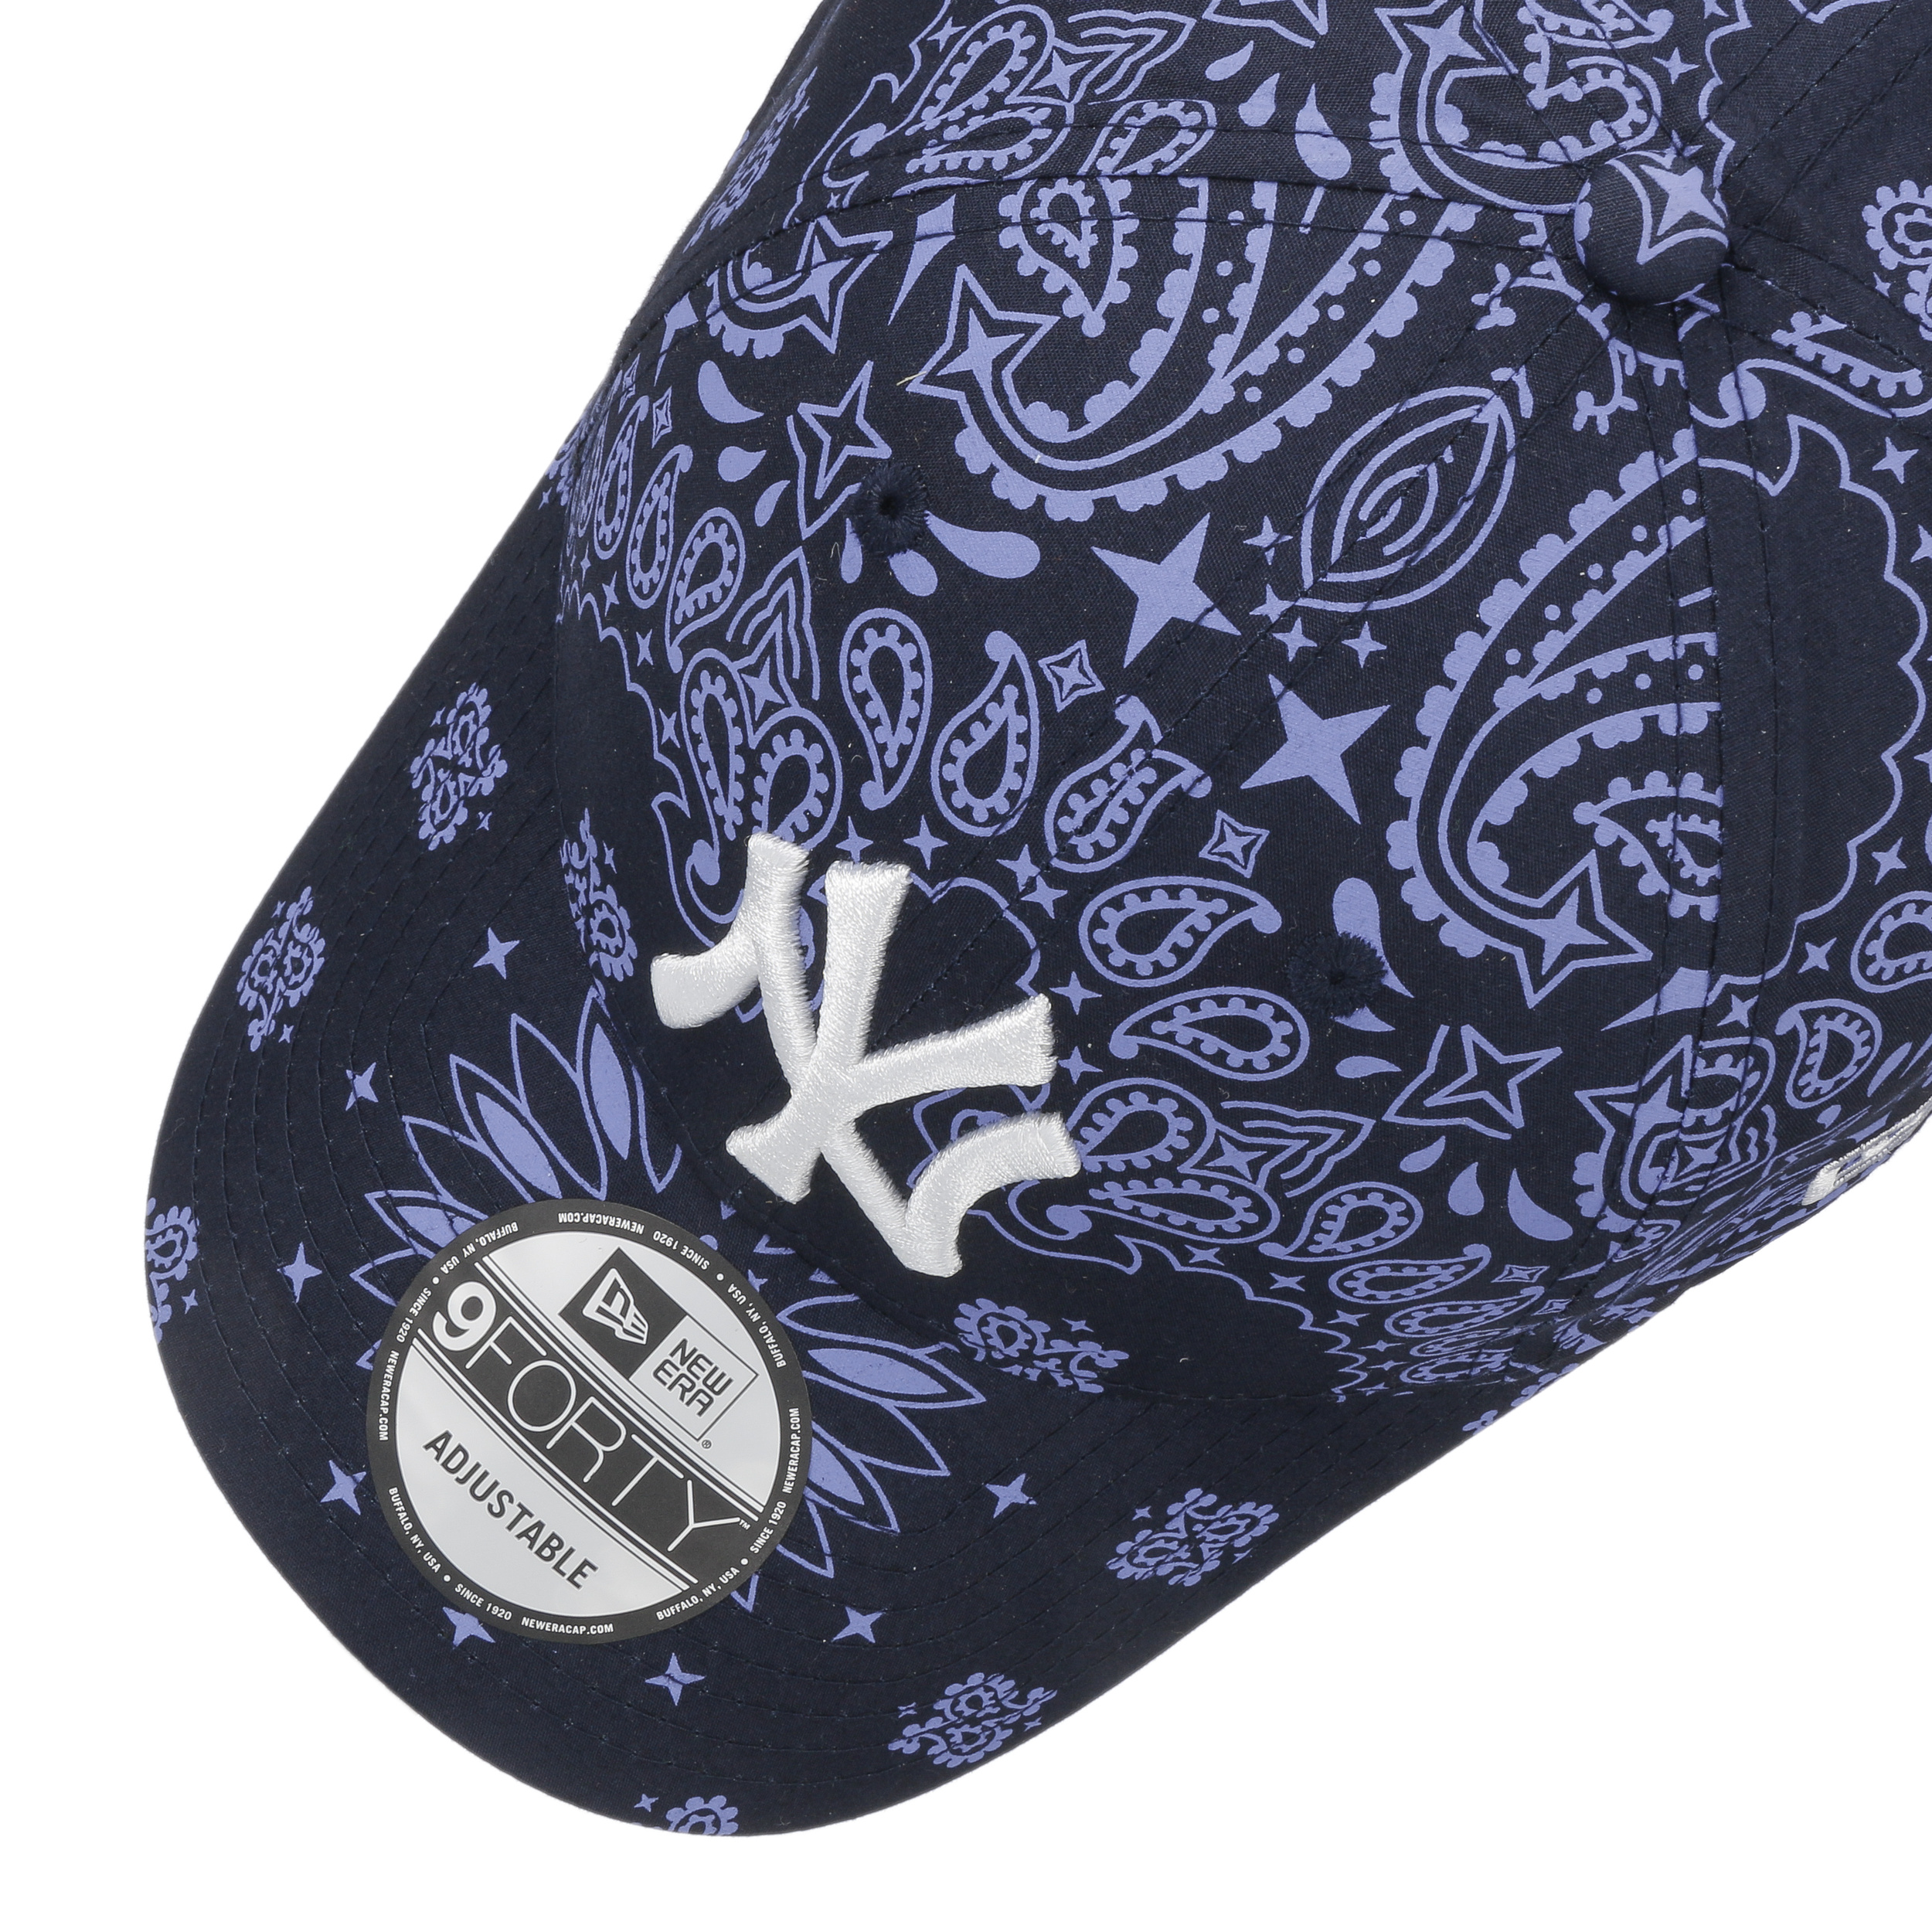 Official New Era New York Yankees Paisley Print MLB 9FORTY Cap A8877_282